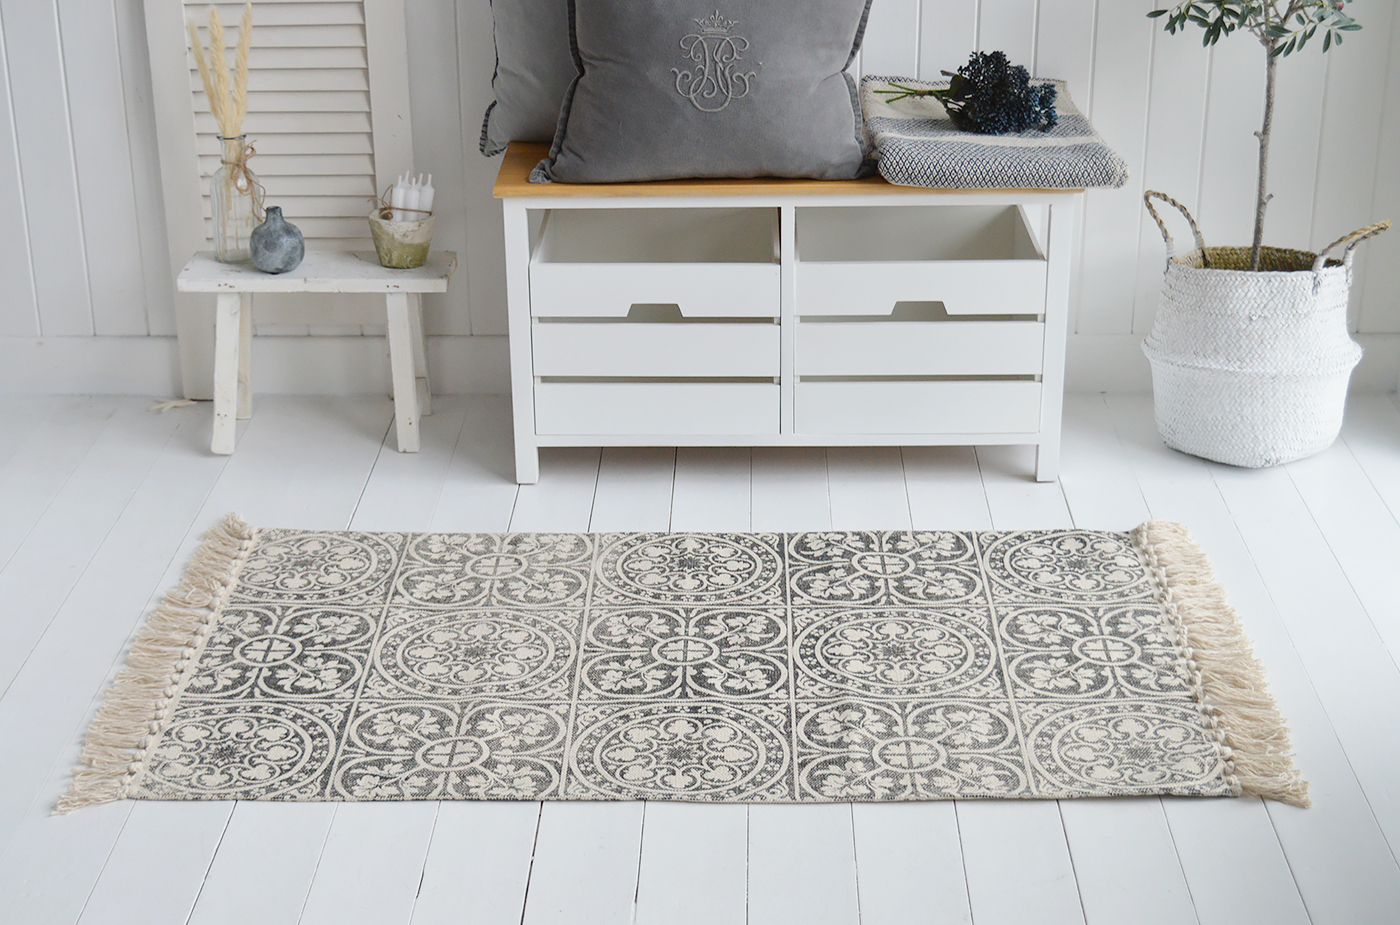 New England floor coverings ideal for coastal styled homes to complement white furniture